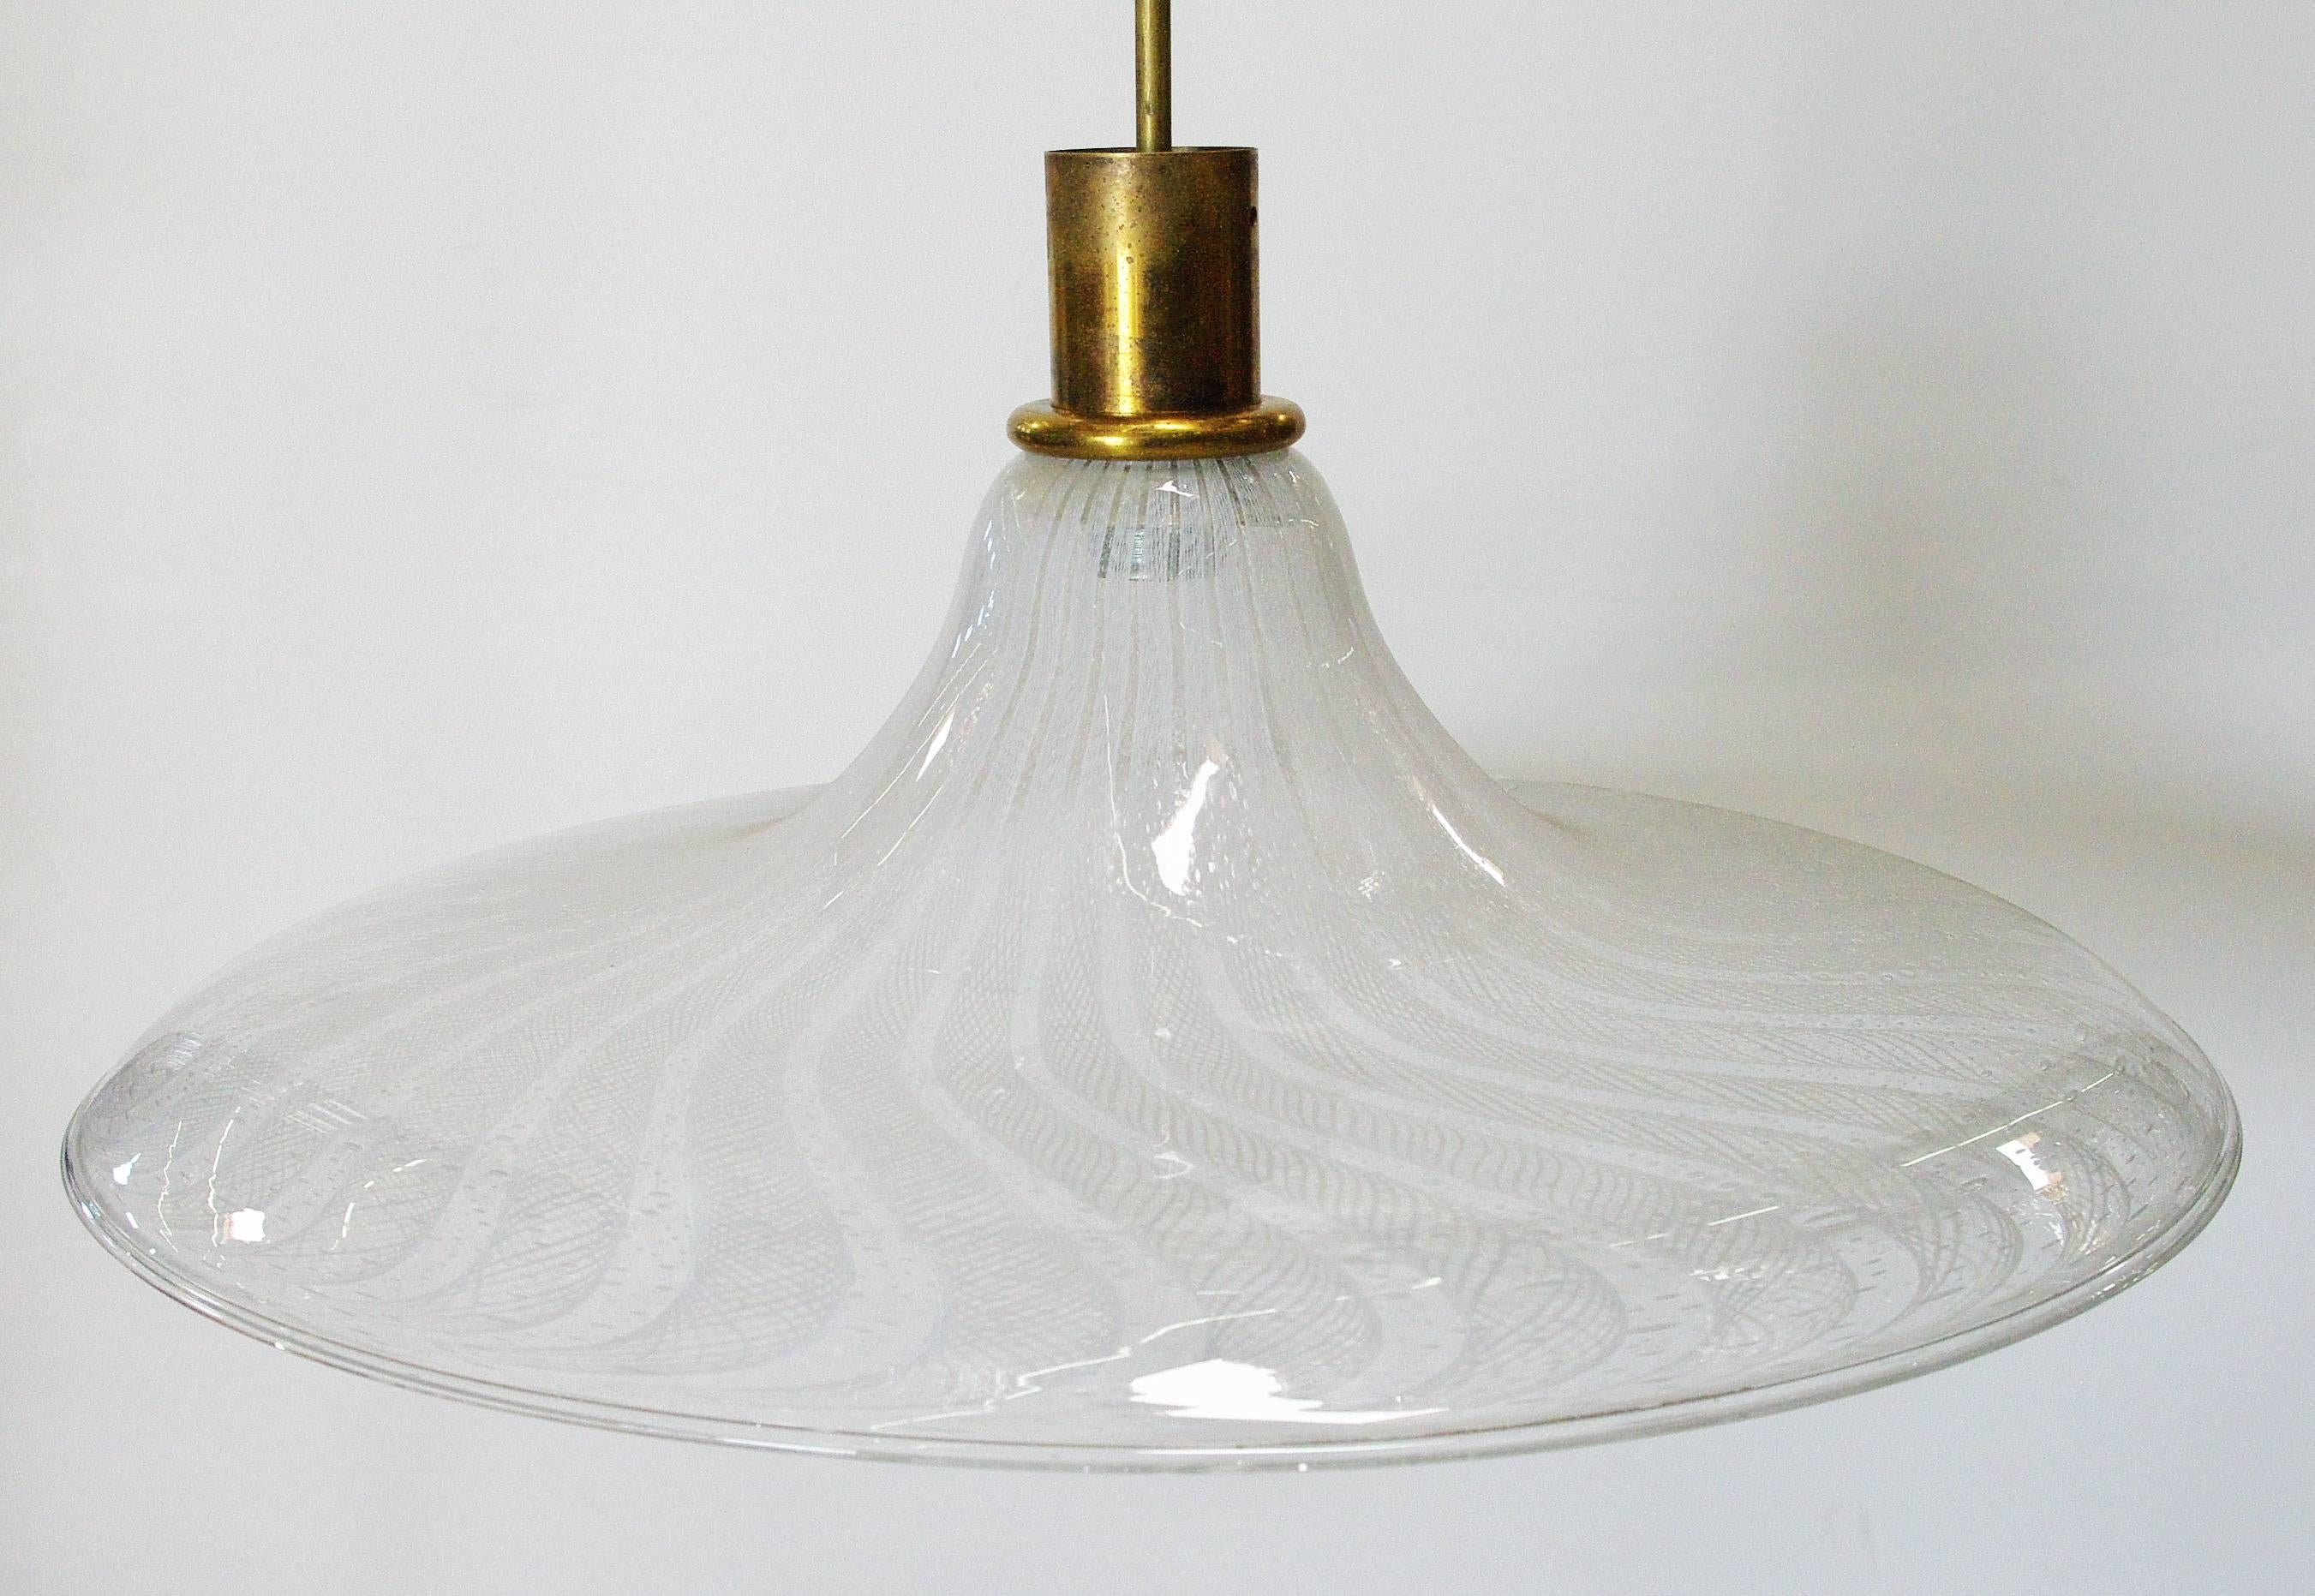 Vintage Italian pendant with clear Murano glass shade hand blown with bubbles within the glass and interlaced frosted patterns using Bollicine and Filigrana techniques, mounted on brass hardware / Designed by Venini circa 1960’s / Made in Italy
1